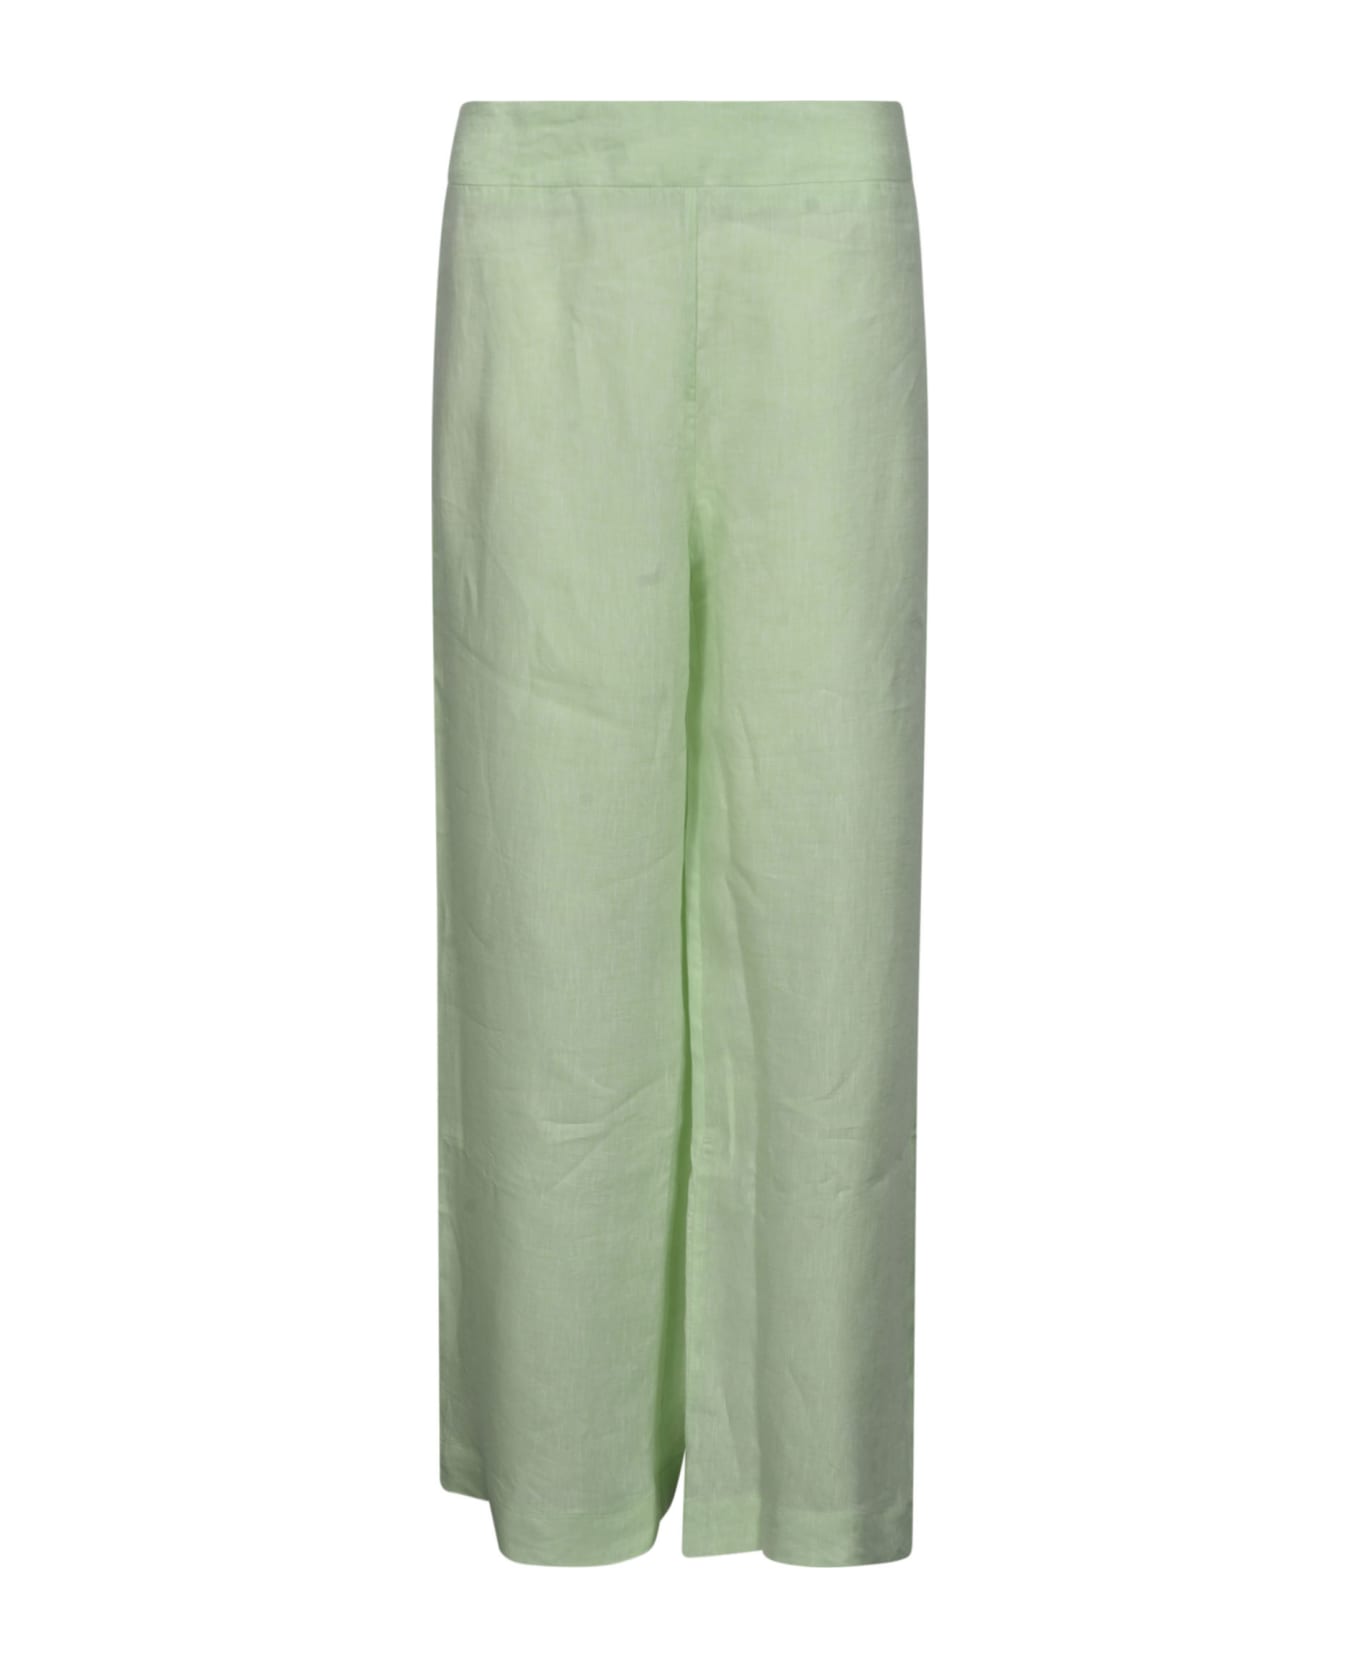 Ermanno Scervino Straight Oversized Trousers - Green ボトムス